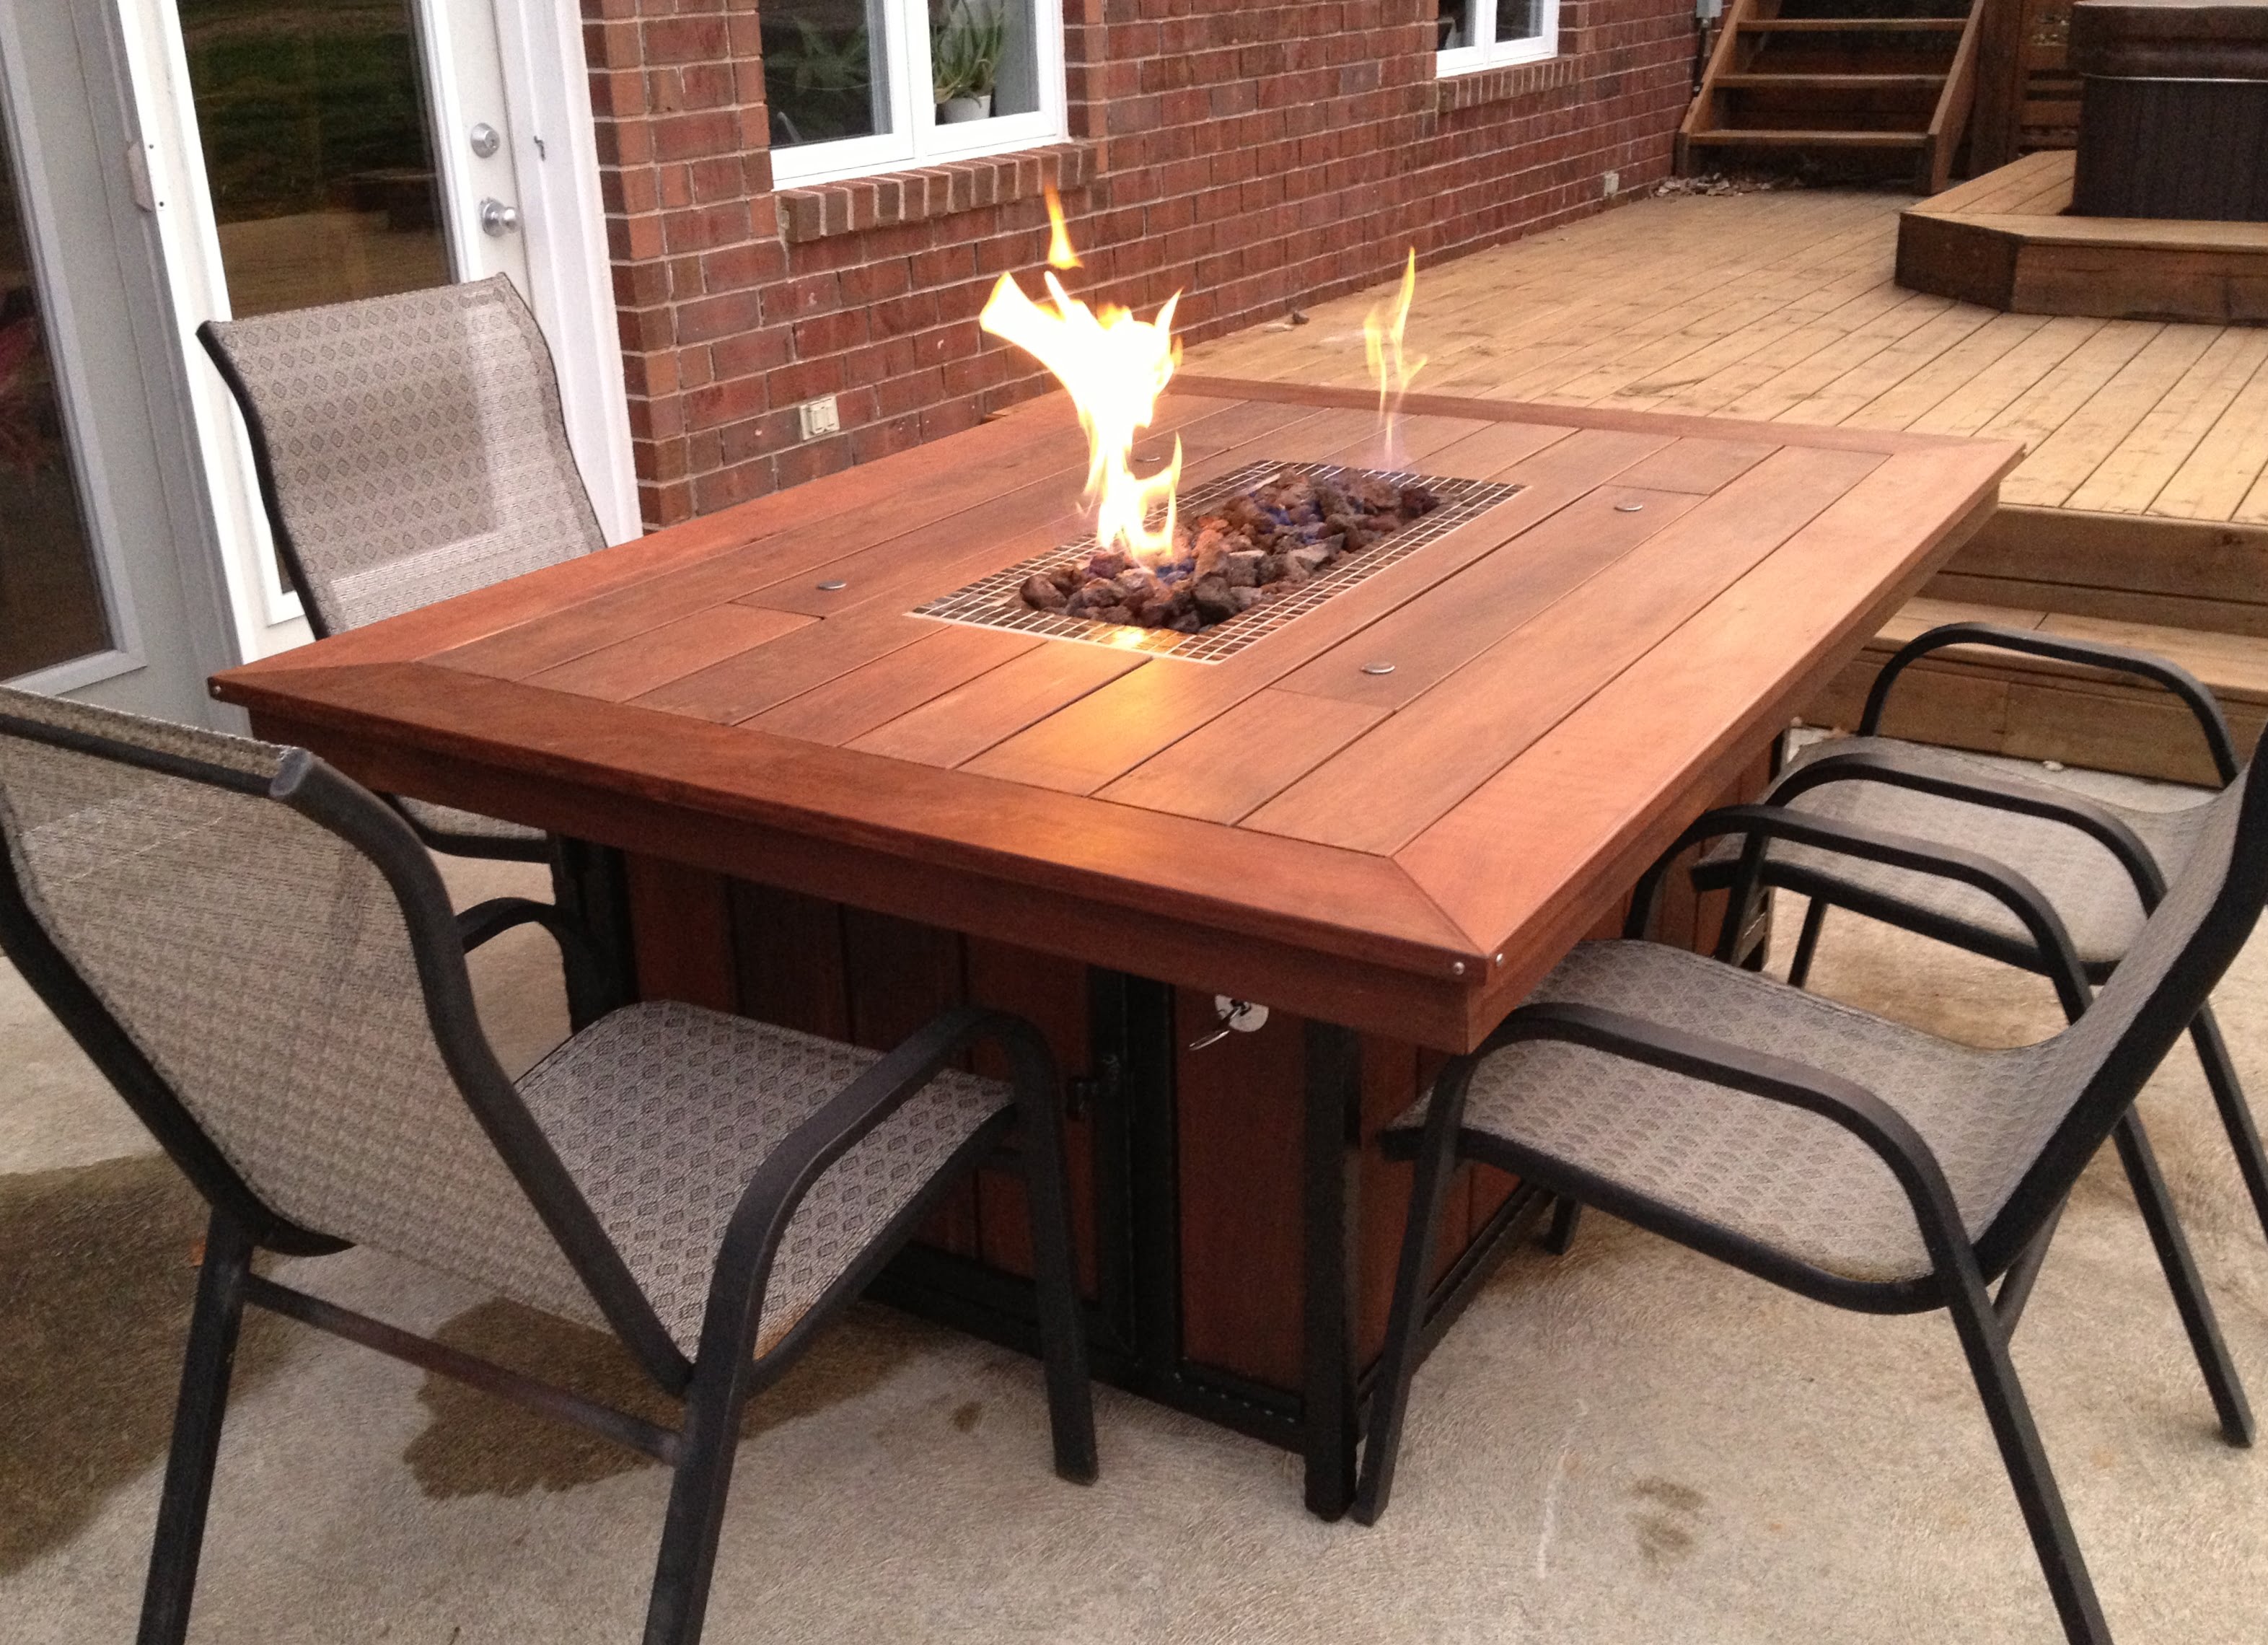 fire pit table in Backyard Landscaing Ideas-Attractive Fire Pit Designs Homesthetics